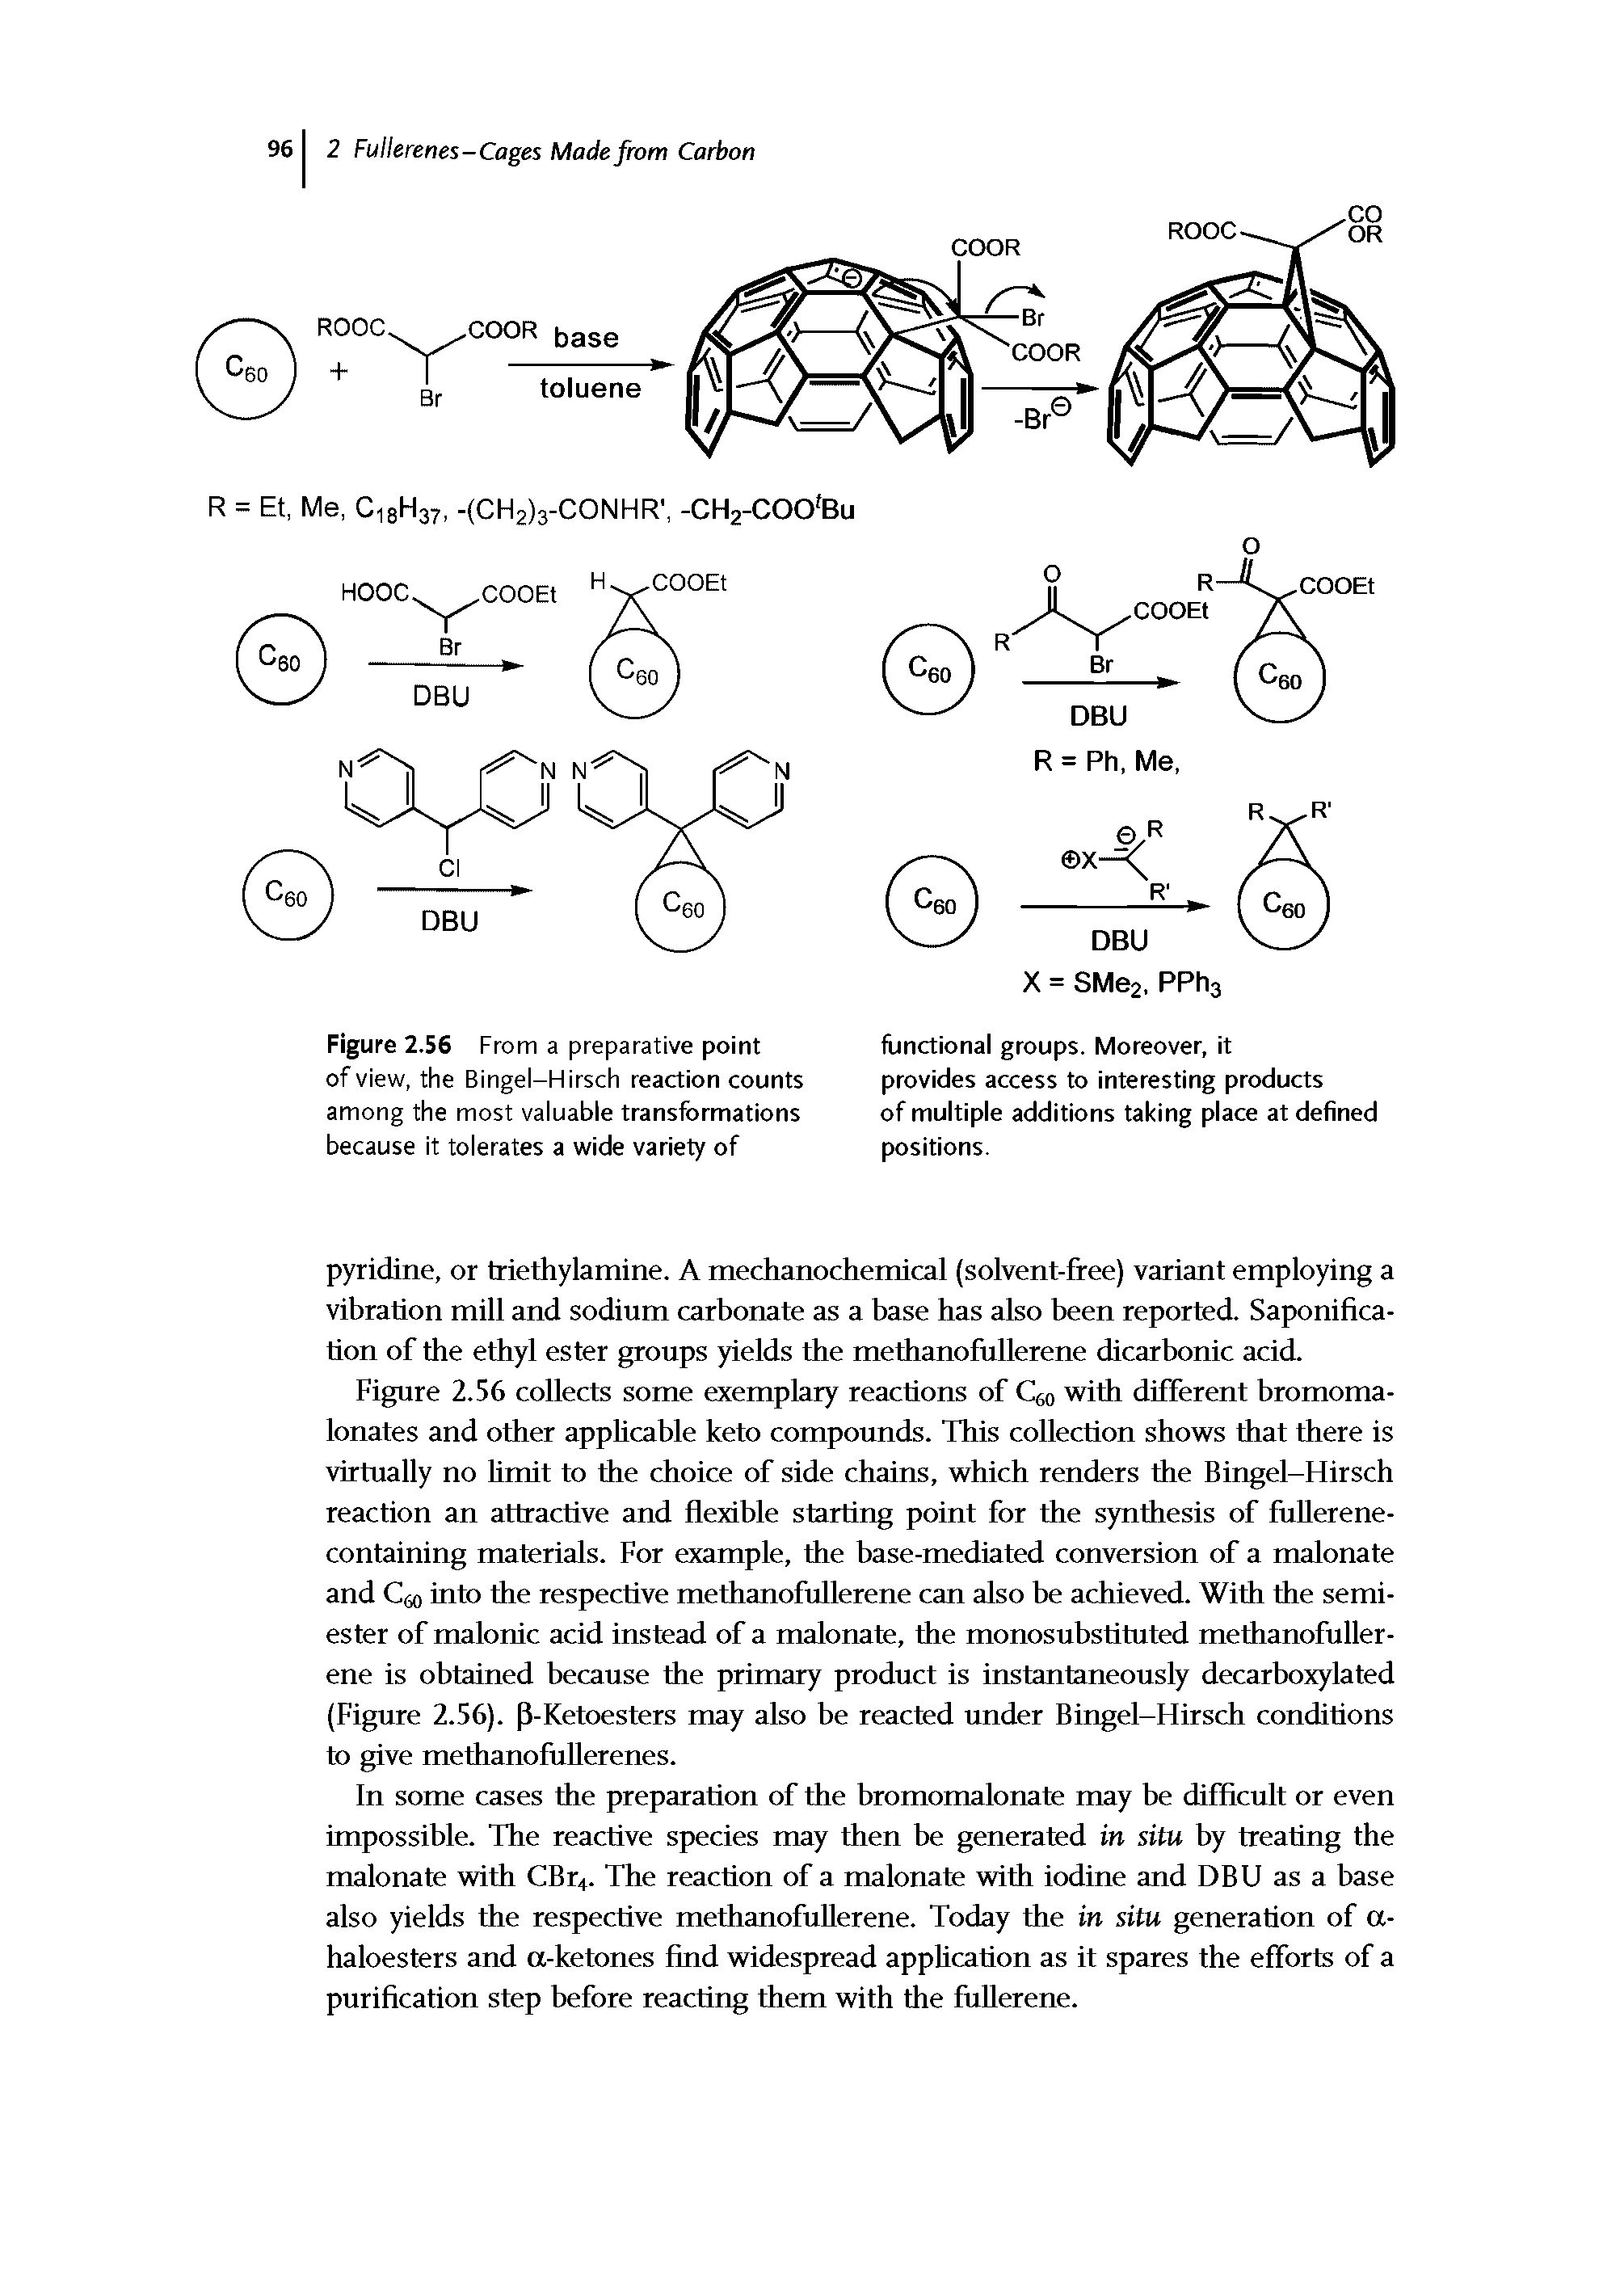 Figure 2.56 collects some exemplary reactions of Ceo with different bromoma-lonates and other applicable keto compounds. This collection shows that there is virtually no Umit to the choice of side chains, which renders the Bingel-Hirsch reaction an attractive and flexible starting point for the synthesis of fuUerene-containing materials. For example, the base-mediated conversion of a malonate and Cao into the respective methanofullerene can also be achieved. With the semiester of malonic acid instead of a malonate, the monosubstituted methanofullerene is obtained because the primary product is instantaneously decarboxylated (Figure 2.56). P-Ketoesters may also be reacted under Bingel-Hirsch conditions to give methanofuUerenes.